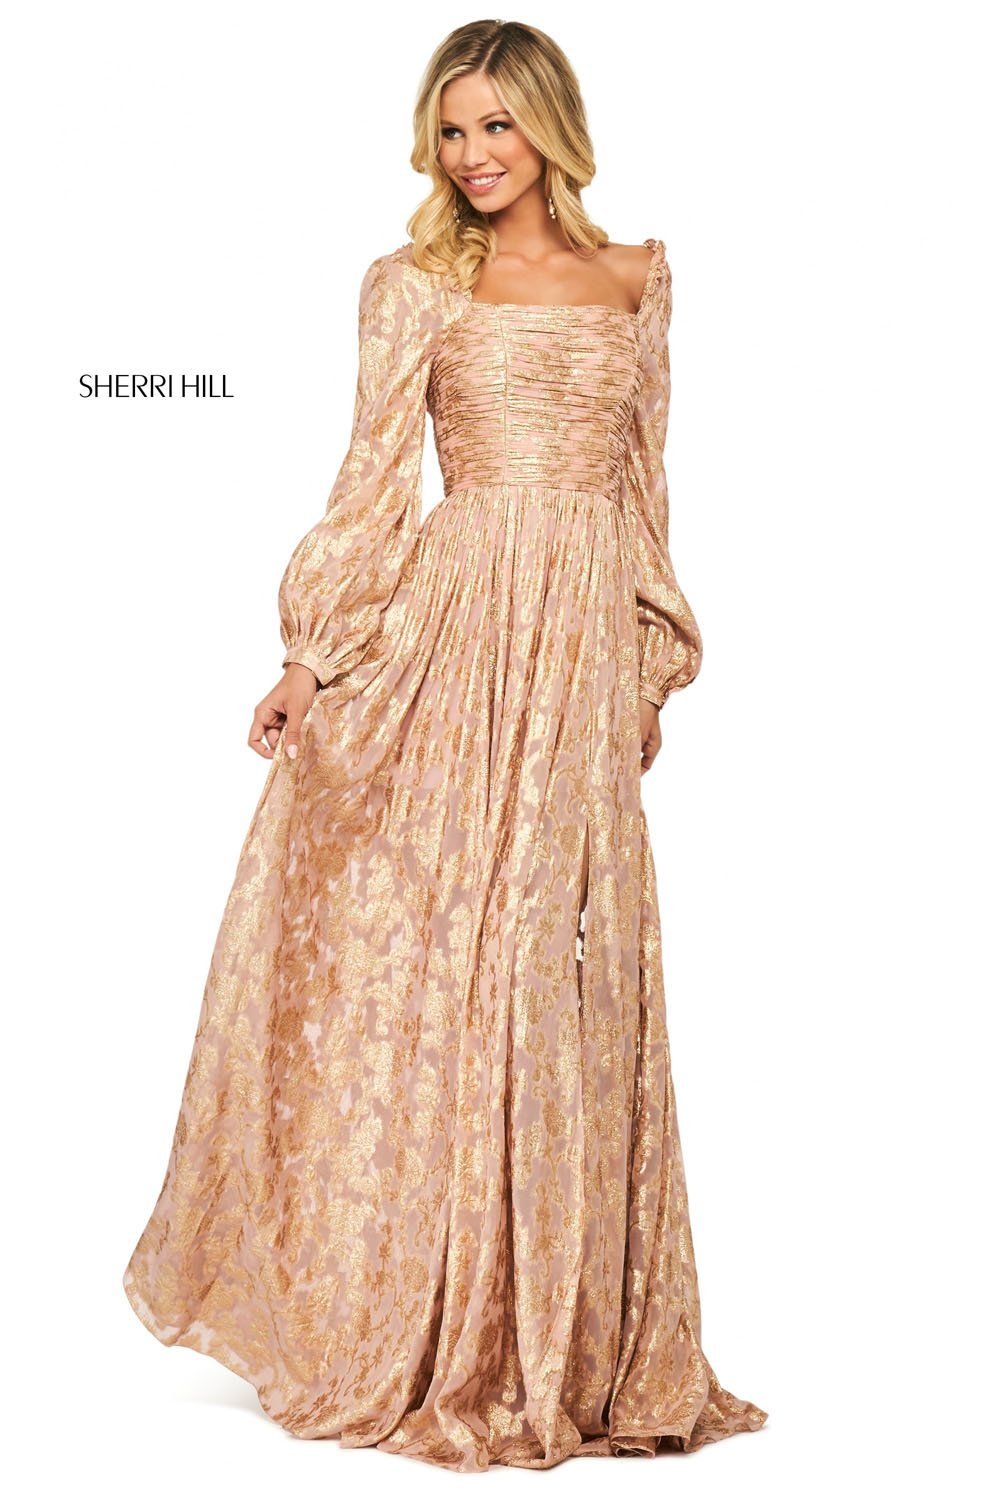 Sherri Hill 53461 dress images in these colors: Ivory Gold, Blush Gold, Coral Gold, Aqua Gold.